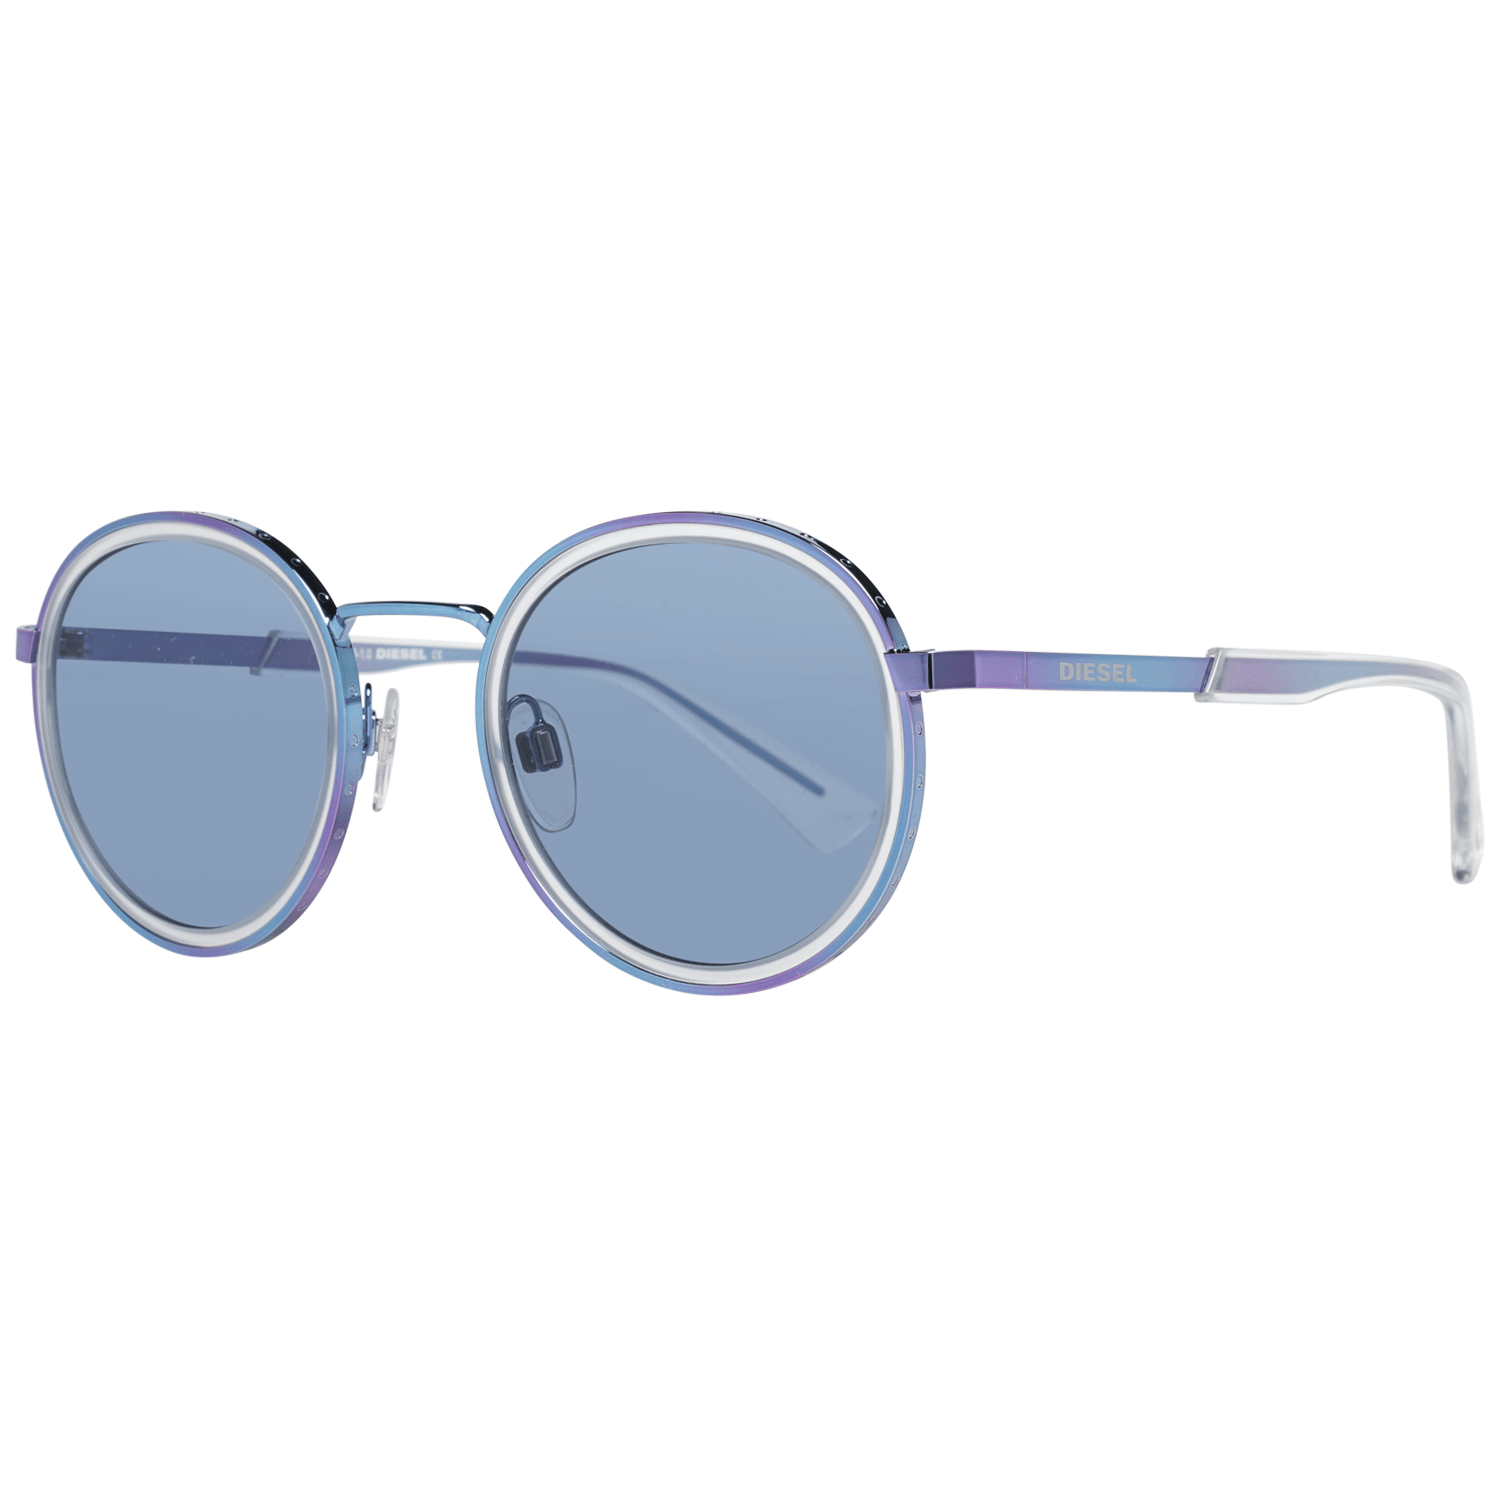 GenderUnisexMain colorBlueFrame colorBlueFrame materialMetal & PlasticLenses colorBlueLenses materialPlasticFilter category2StyleOvalLenses effectNo ExtraProtection100% UVA & UVBSize49-23-145Lenses width49mmLenses height44mmBridge width23mmFrame width140mmTemples length145mmShipment includesCase, cleaning clothSpring hingeNo